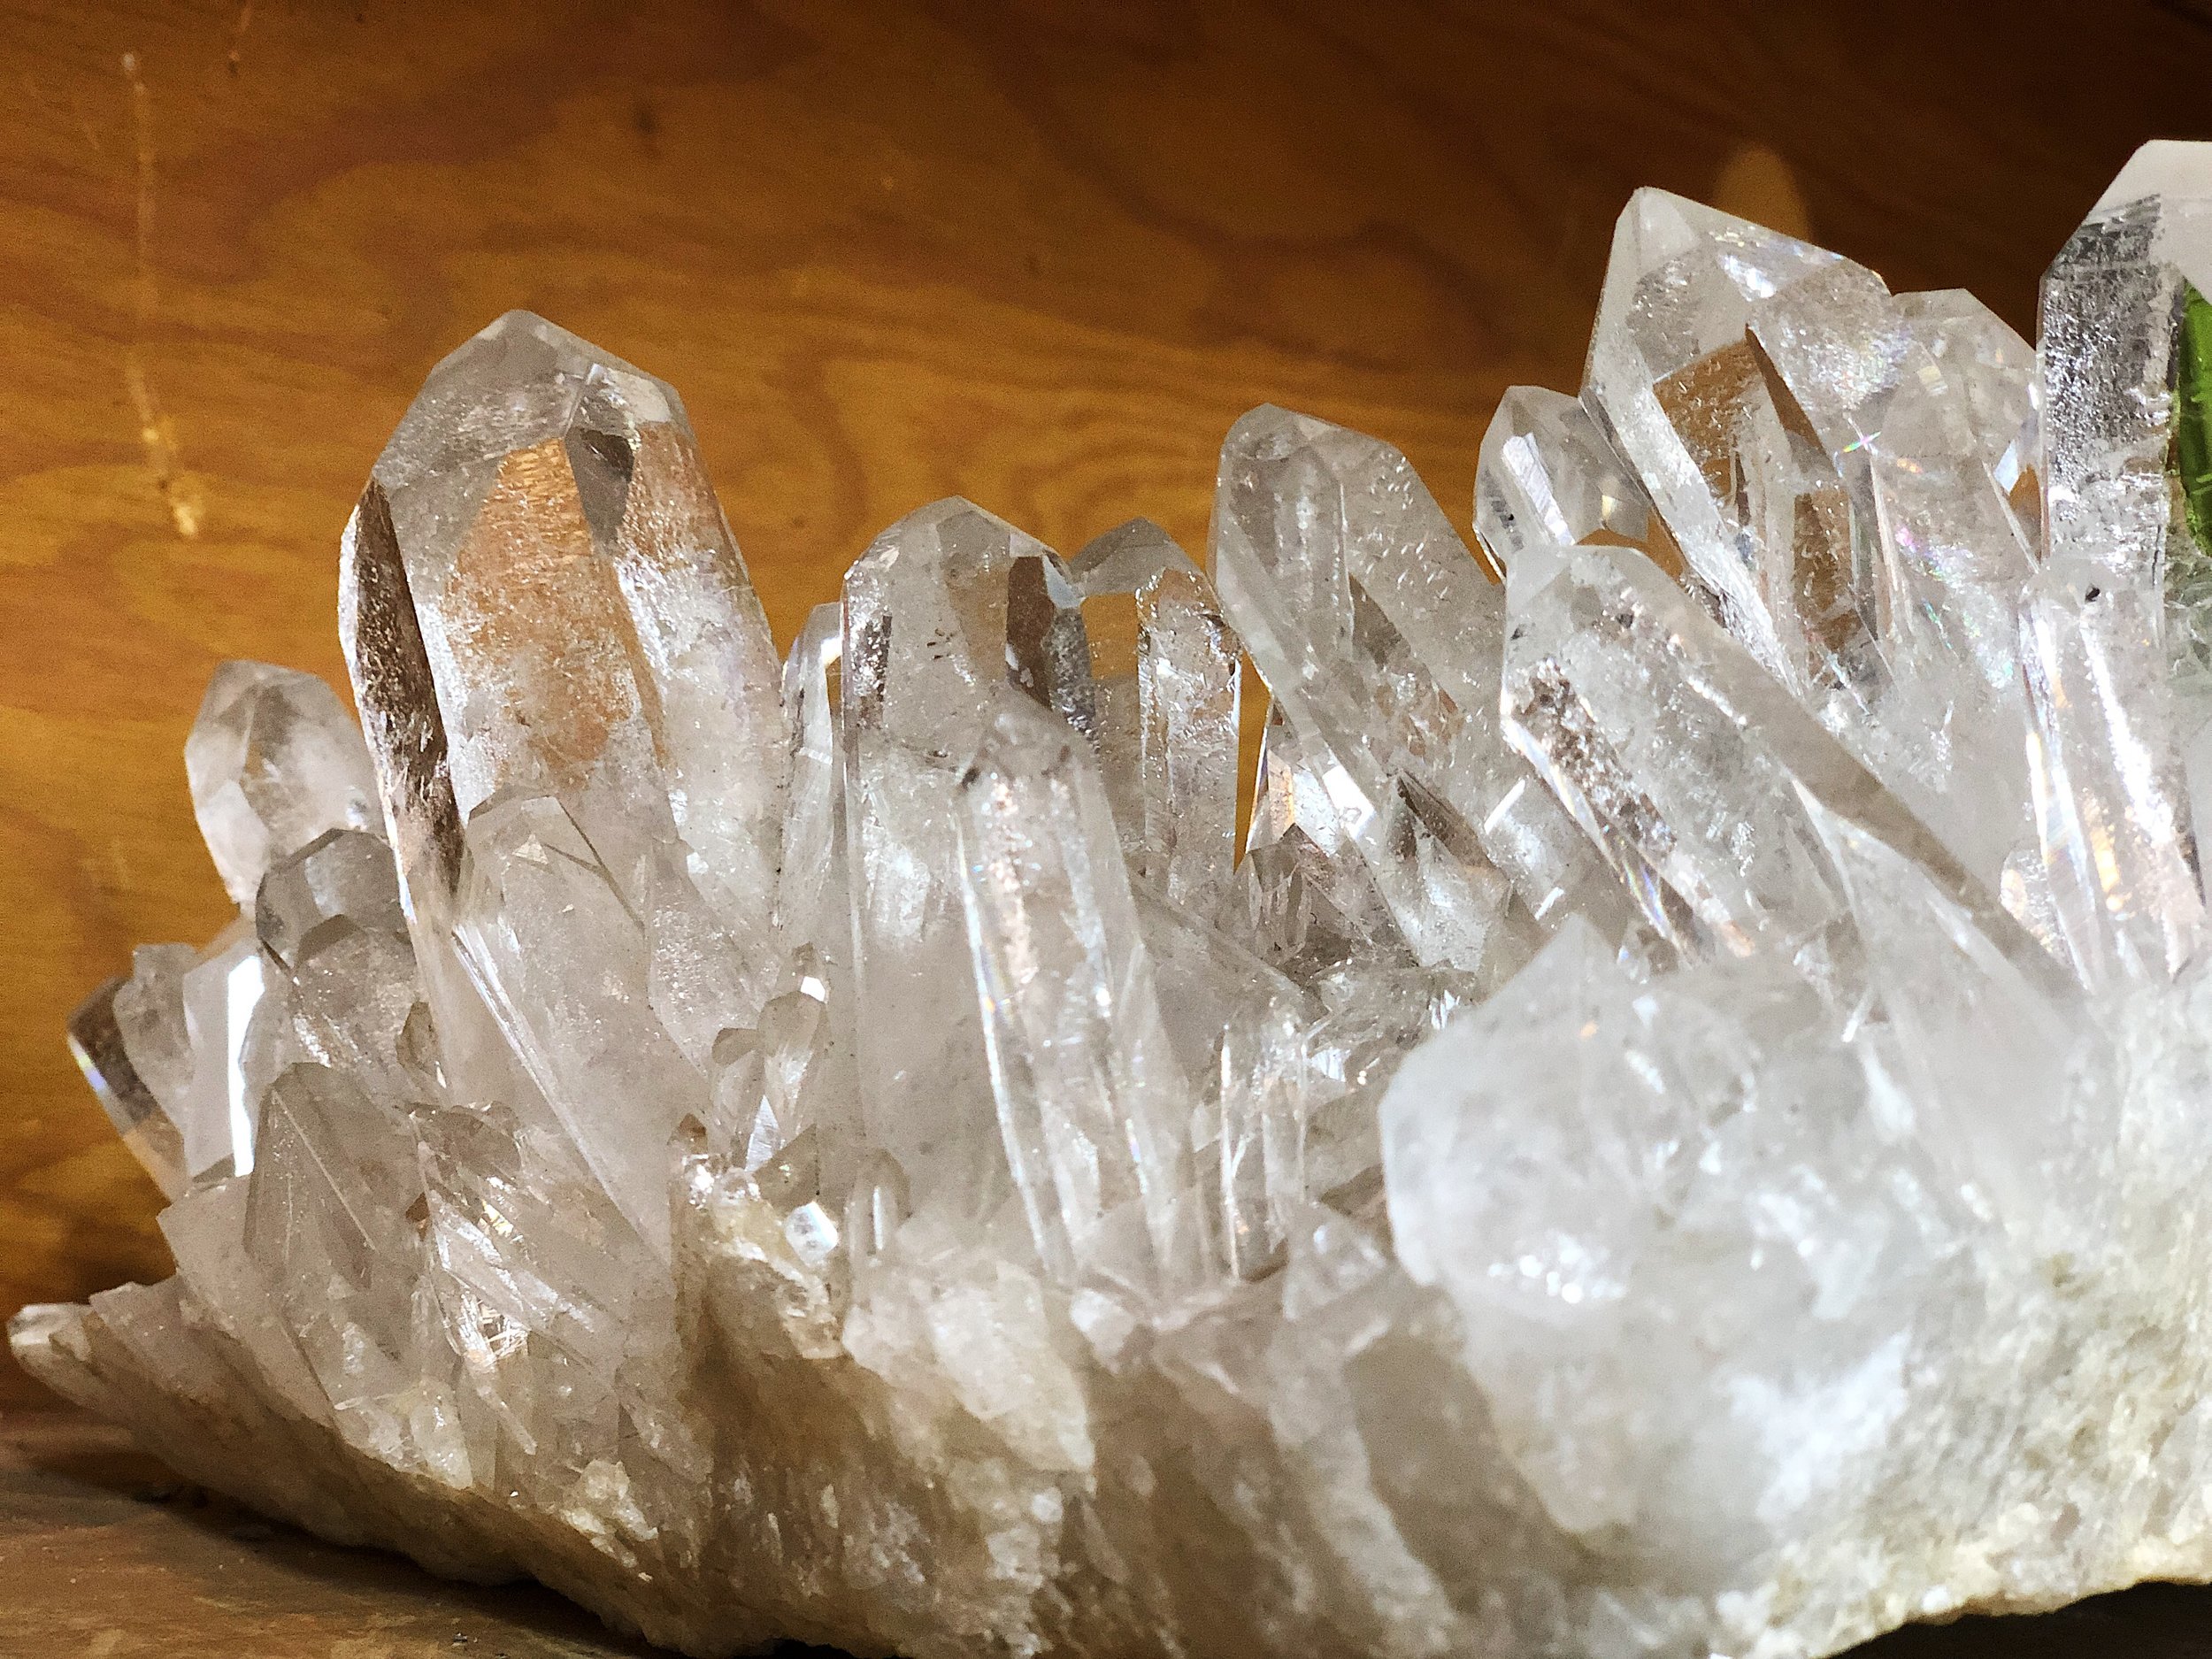 Large Quartz Crystal uncleaned with Internal Rainbows